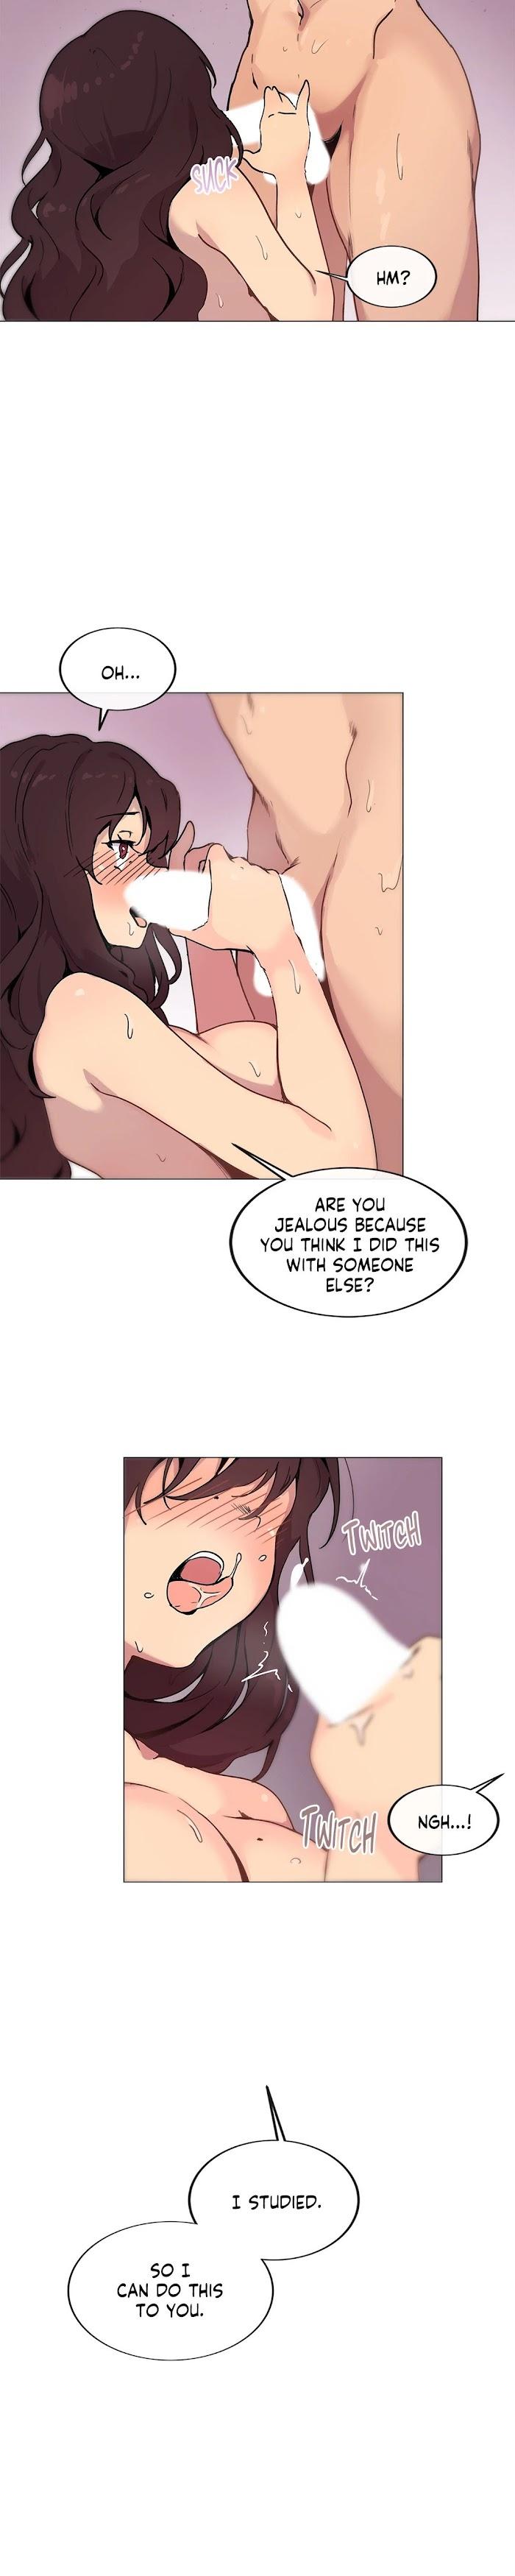 [Dumangoon, 130F] Sexcape Room: Wipe Out Ch.9/9 [English] [Manhwa PDF] Completed 137